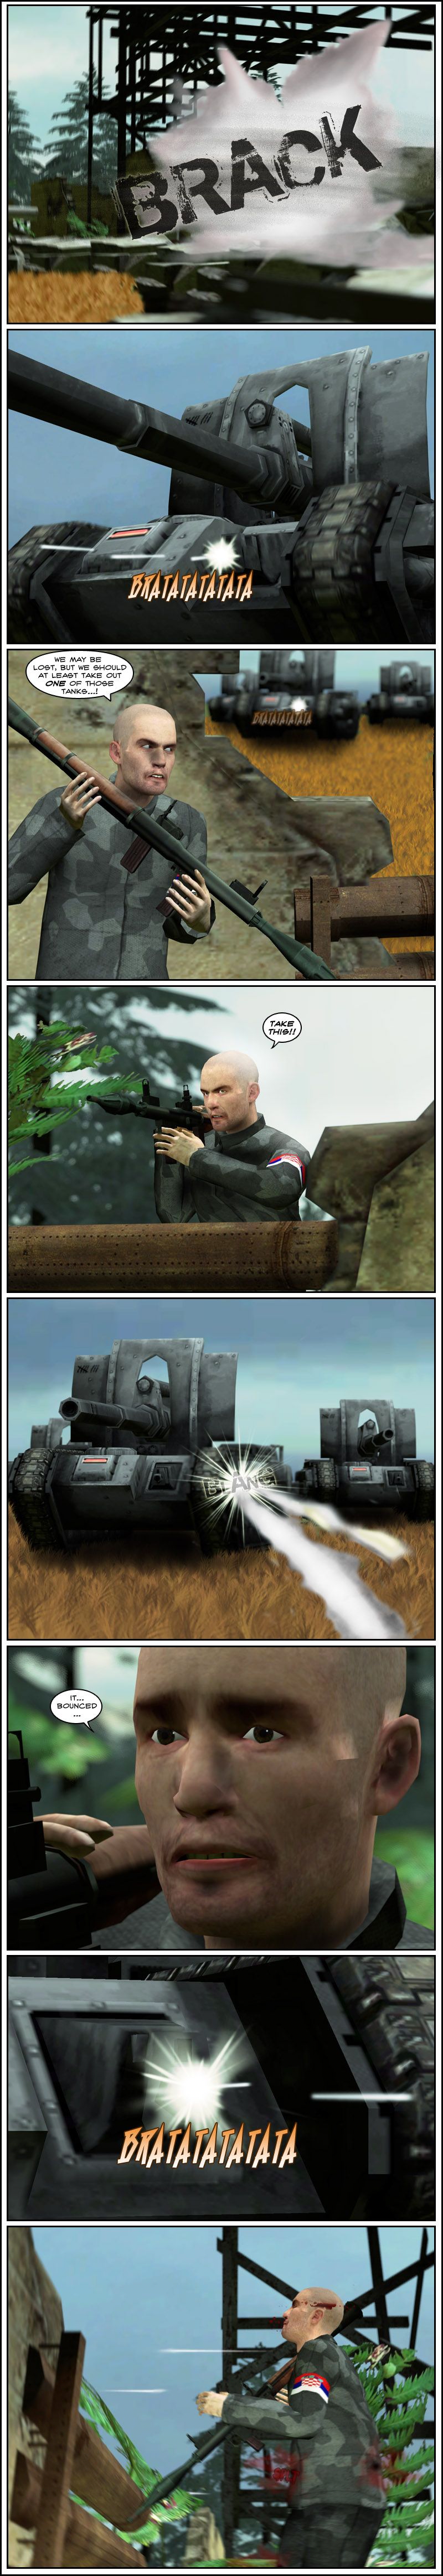 The tank's shell completely obliterates the wall. The tank's smaller gun keeps firing shots as it approaches more rubble, behind which is a soldier with a rocket-propelled grenade launcher, who declares they may have lost but they should at least take out one of those tanks. He peeks out of cover, shouts take this and fires the RPG at the tank. The rocket hits the tank but simply bounces off and into the ground. The soldier mumbles in shock that it bounced, then is killed by the tank's small gun.